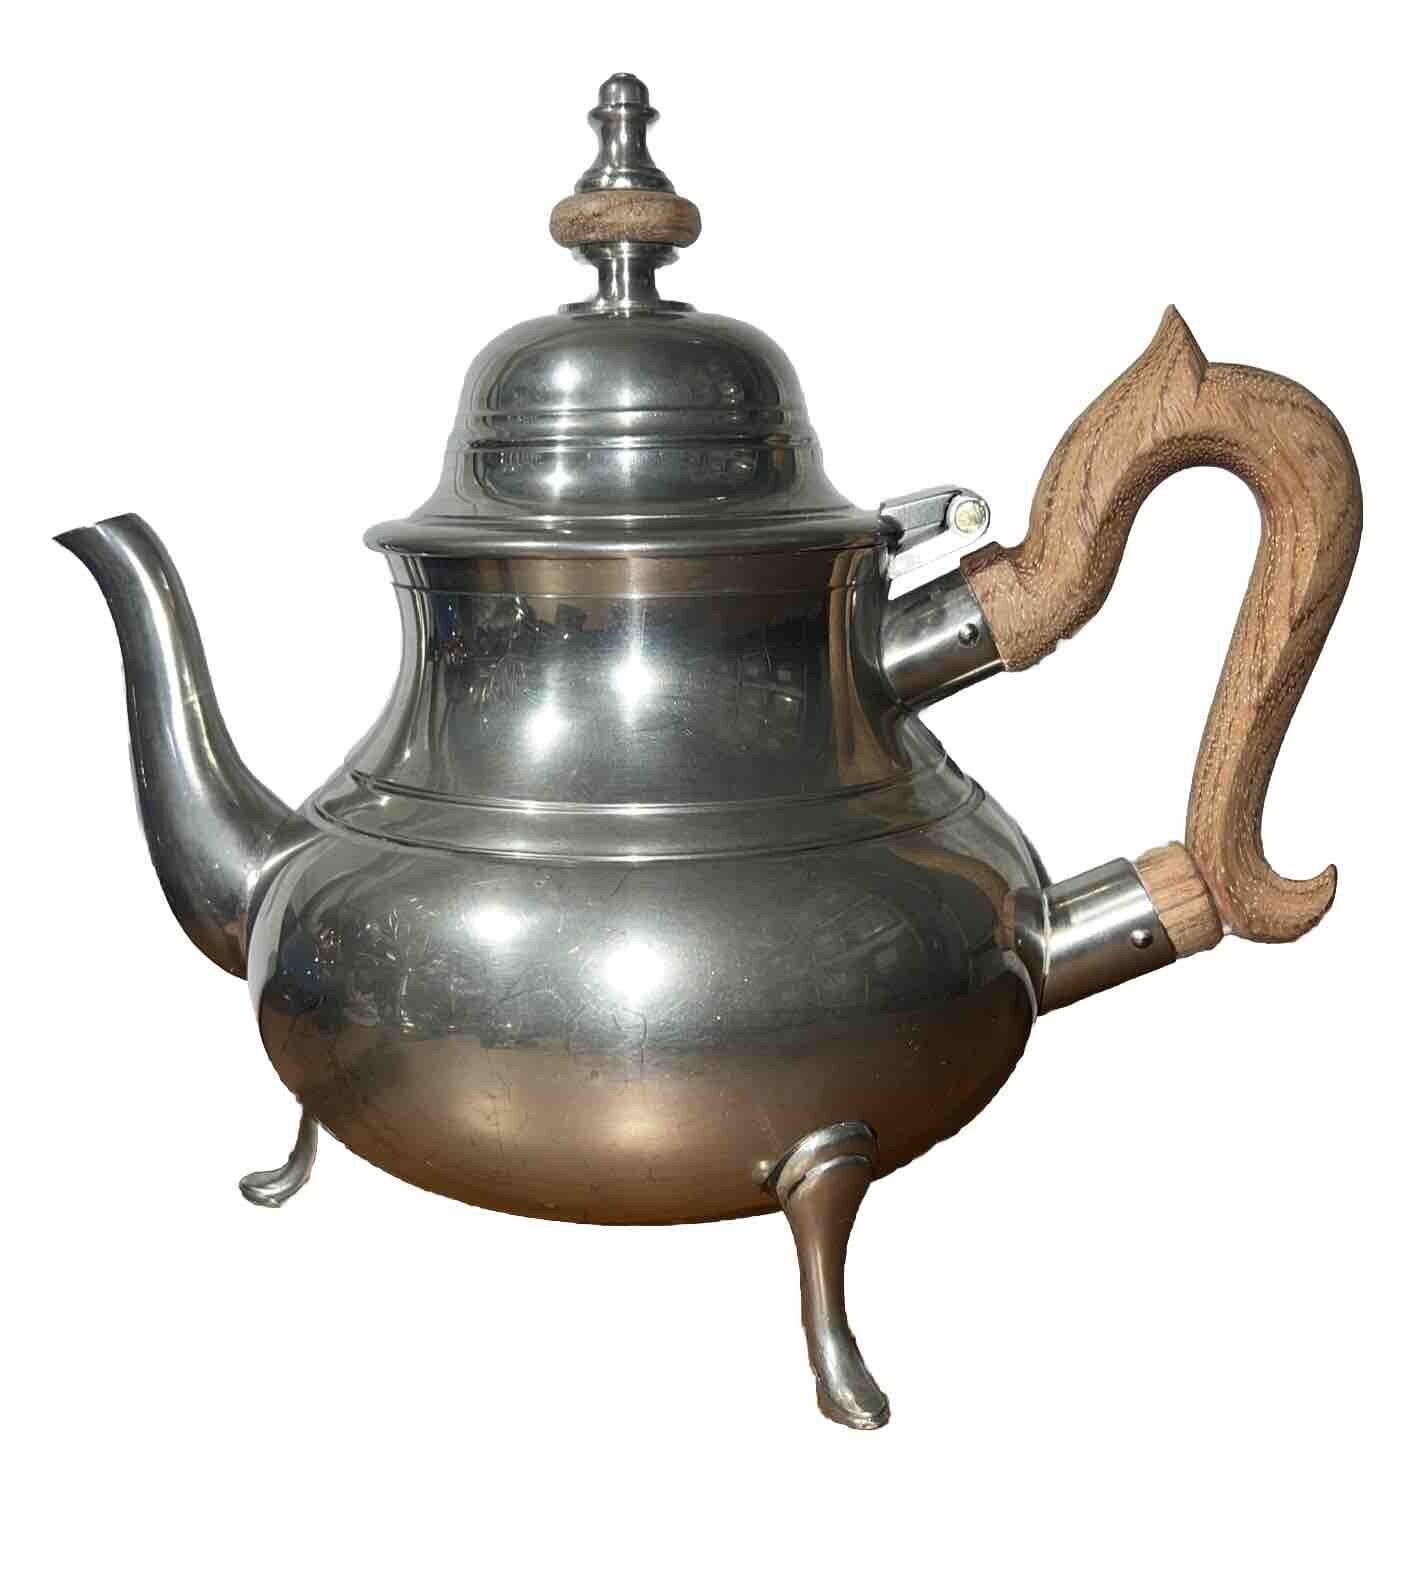 WILLIAMSBURG COLONIAL KIRK STIEFF PEWTER TEAPOT STYLE CW80-22